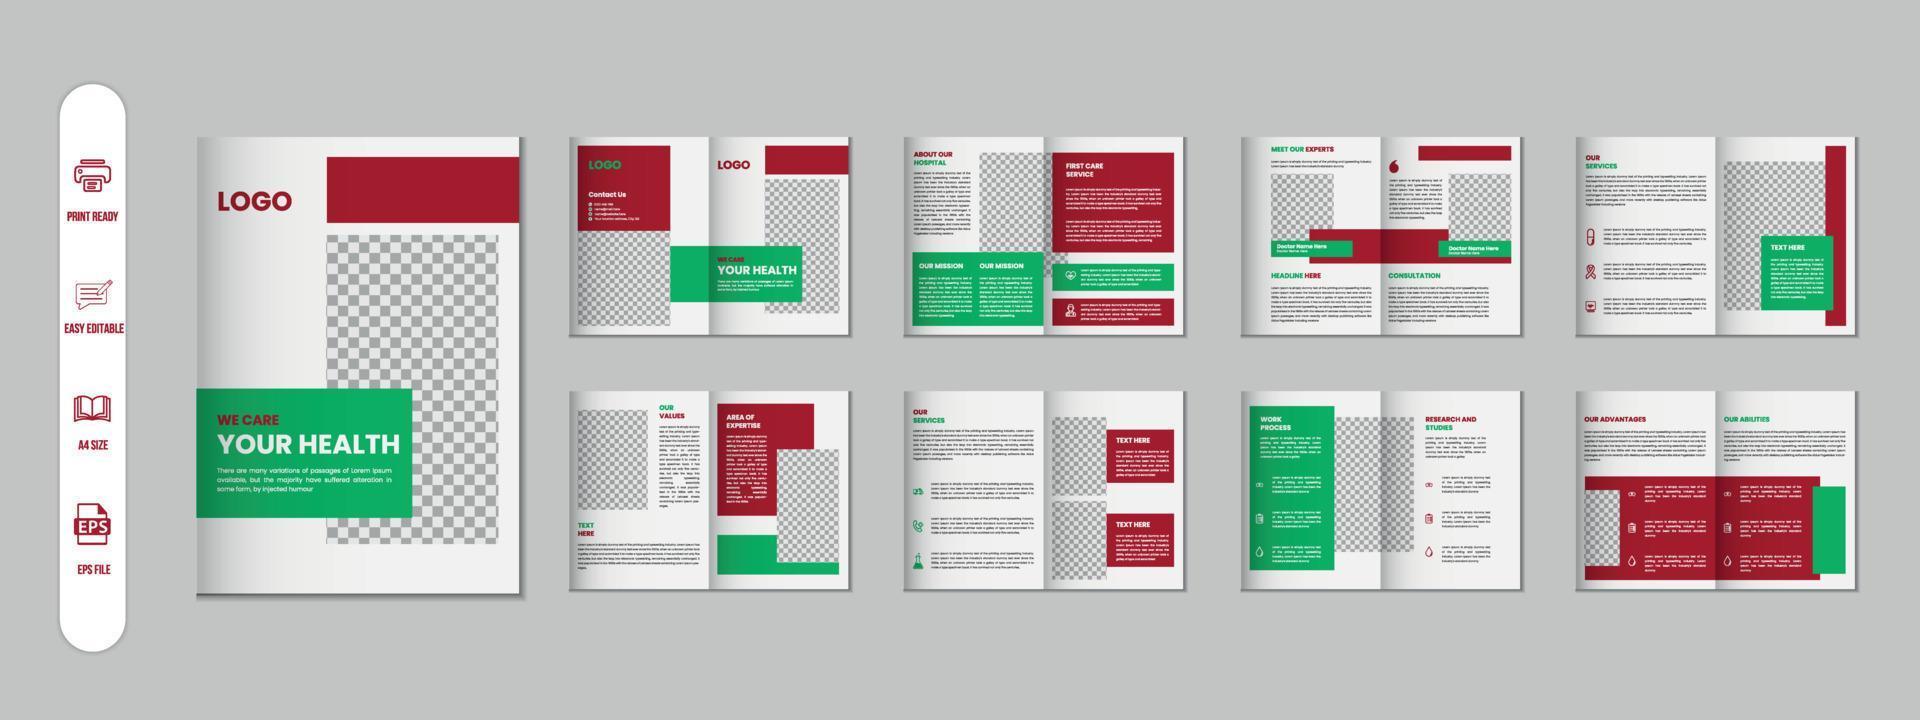 16 Pages Medical brochure, Healthcare annual report, business profile a4 size flyer template design vector